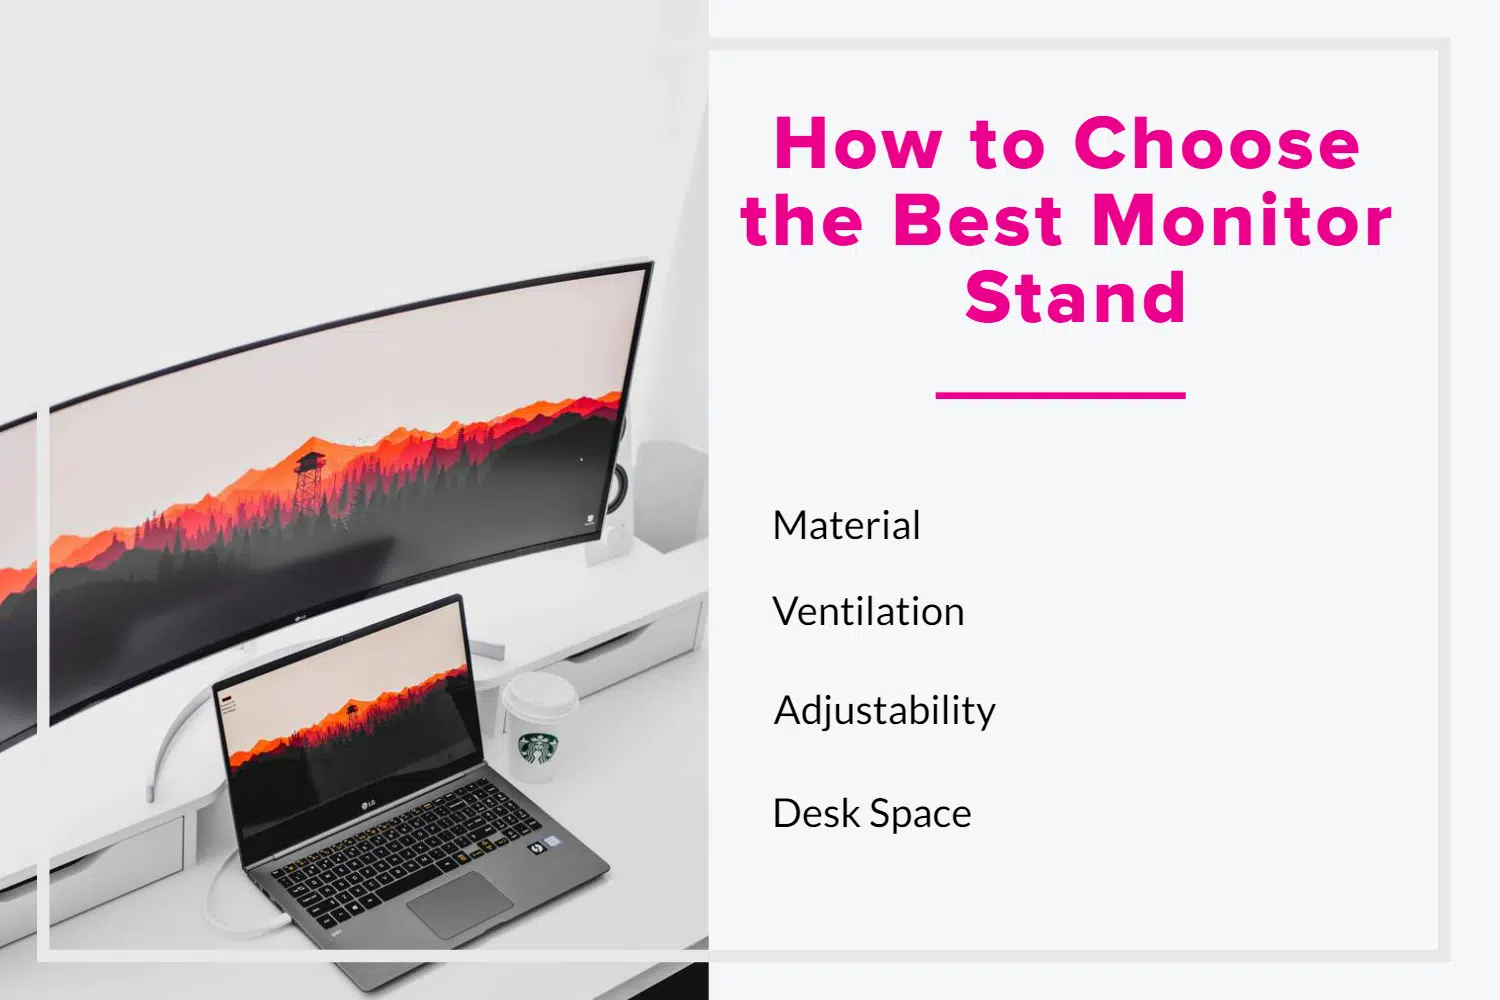 How to Choose the Best Monitor Stand